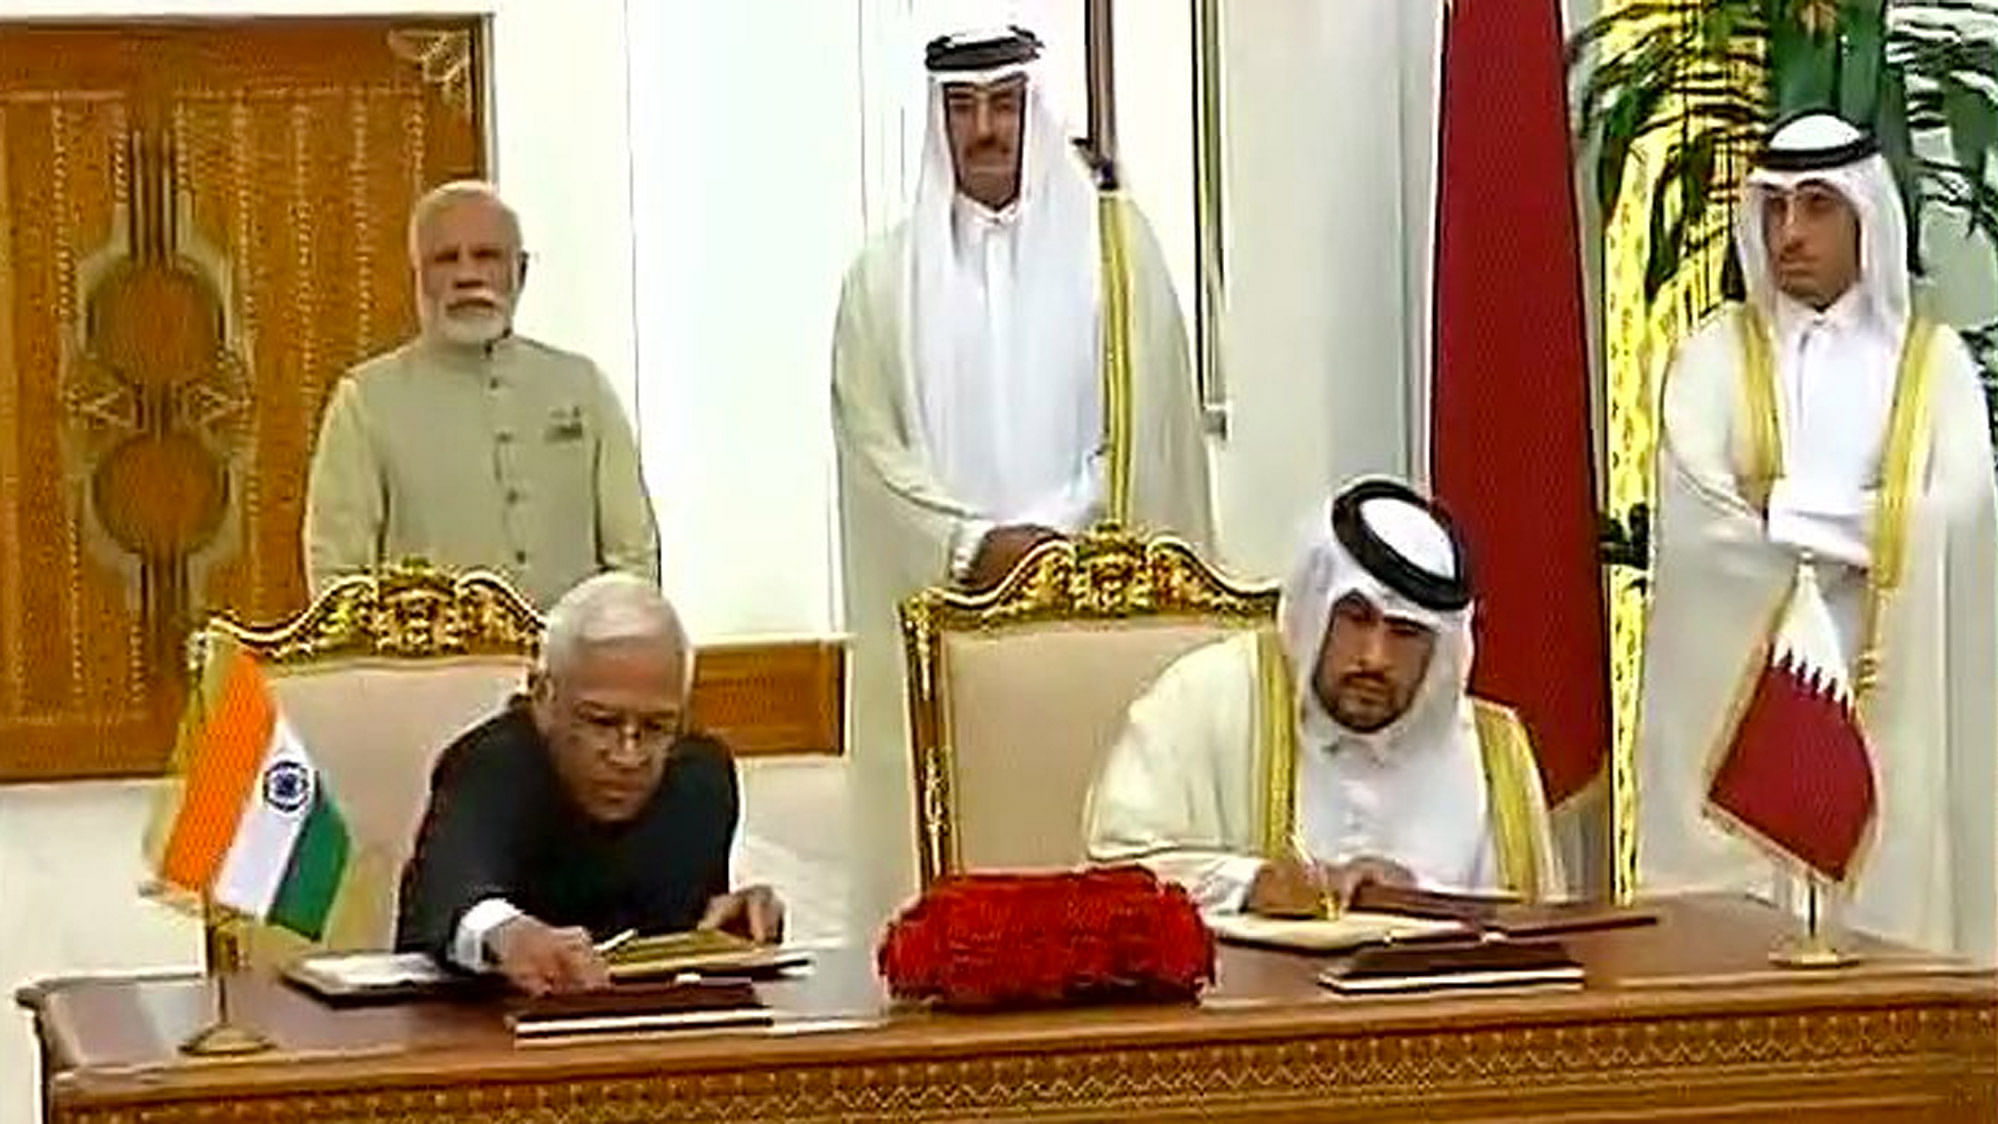 Prime Minister Narendra Modi and Qatar Emir Tamim Bin Hamad Al Thani on Sunday witnessed the signing of agreements in Doha. (Photo Courtesy: <a href="https://twitter.com/MEAIndia">Twitter/Vikas Swarup</a>)